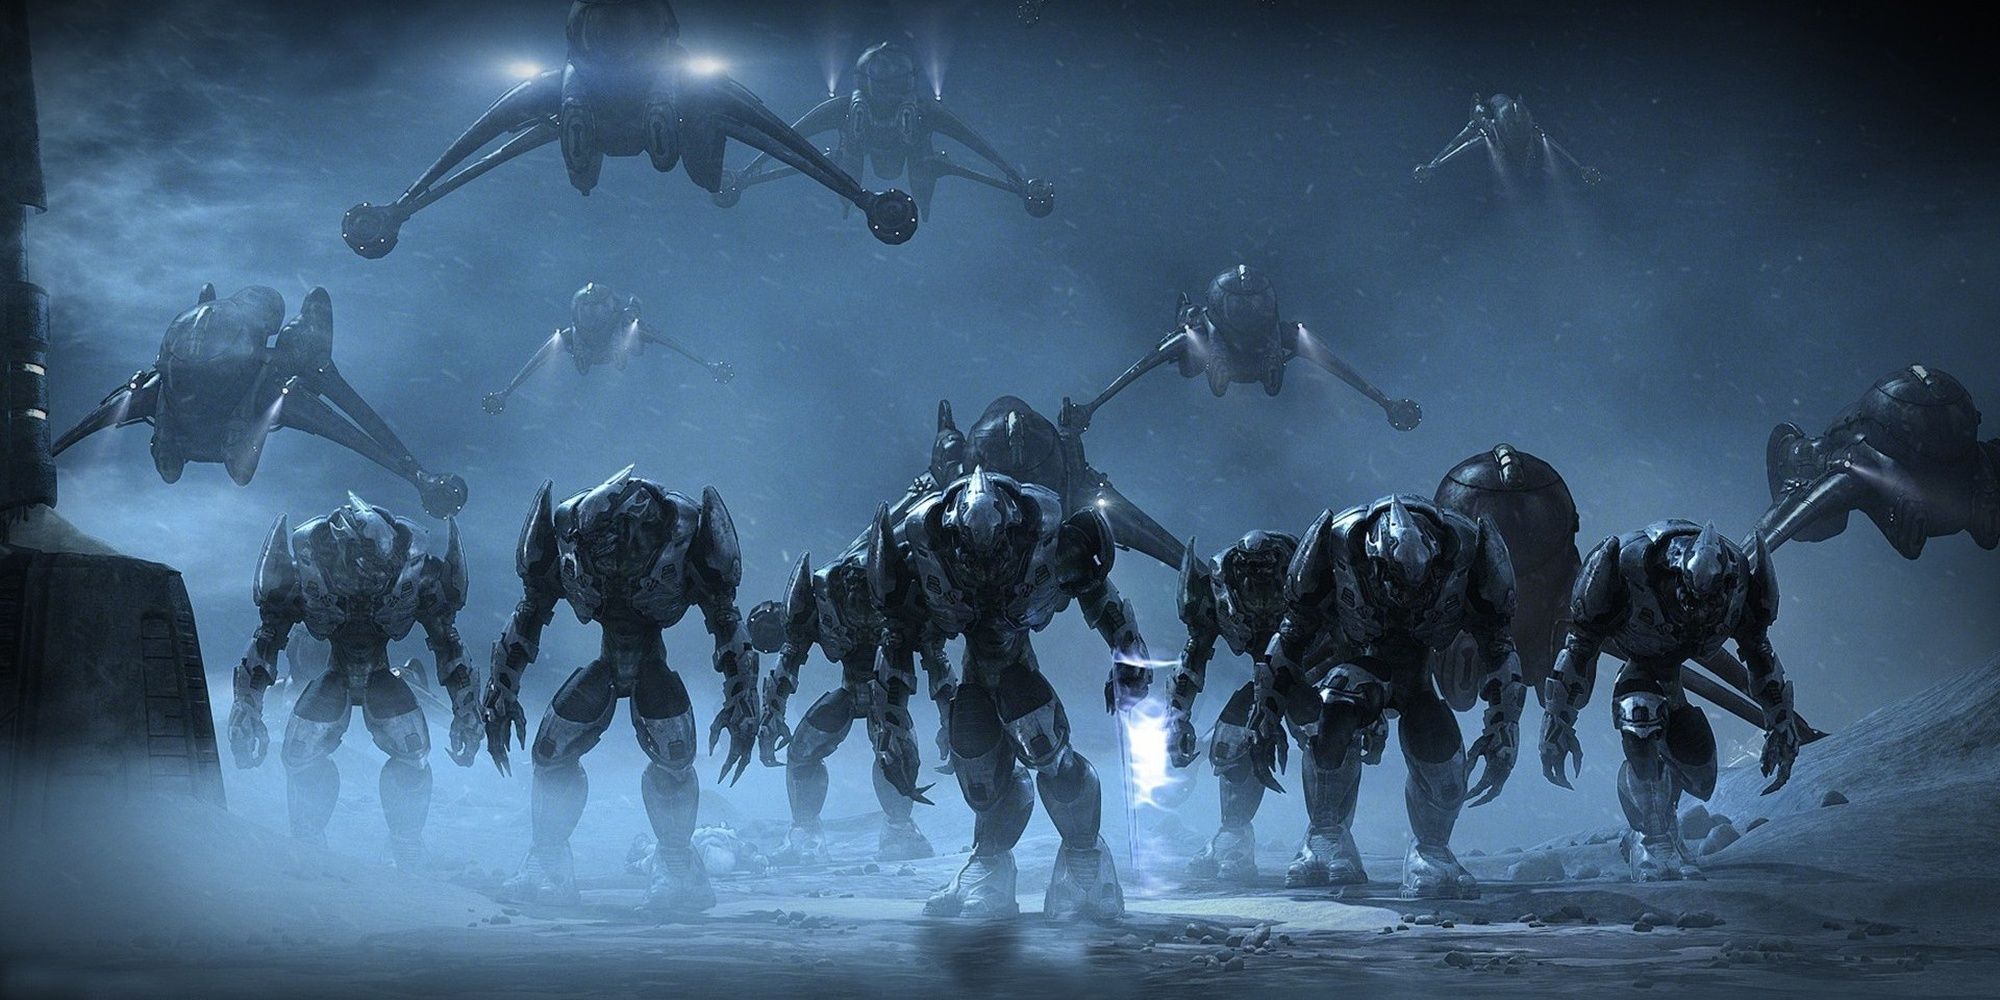 Halo: Covenant Army On The March In Halo Wars